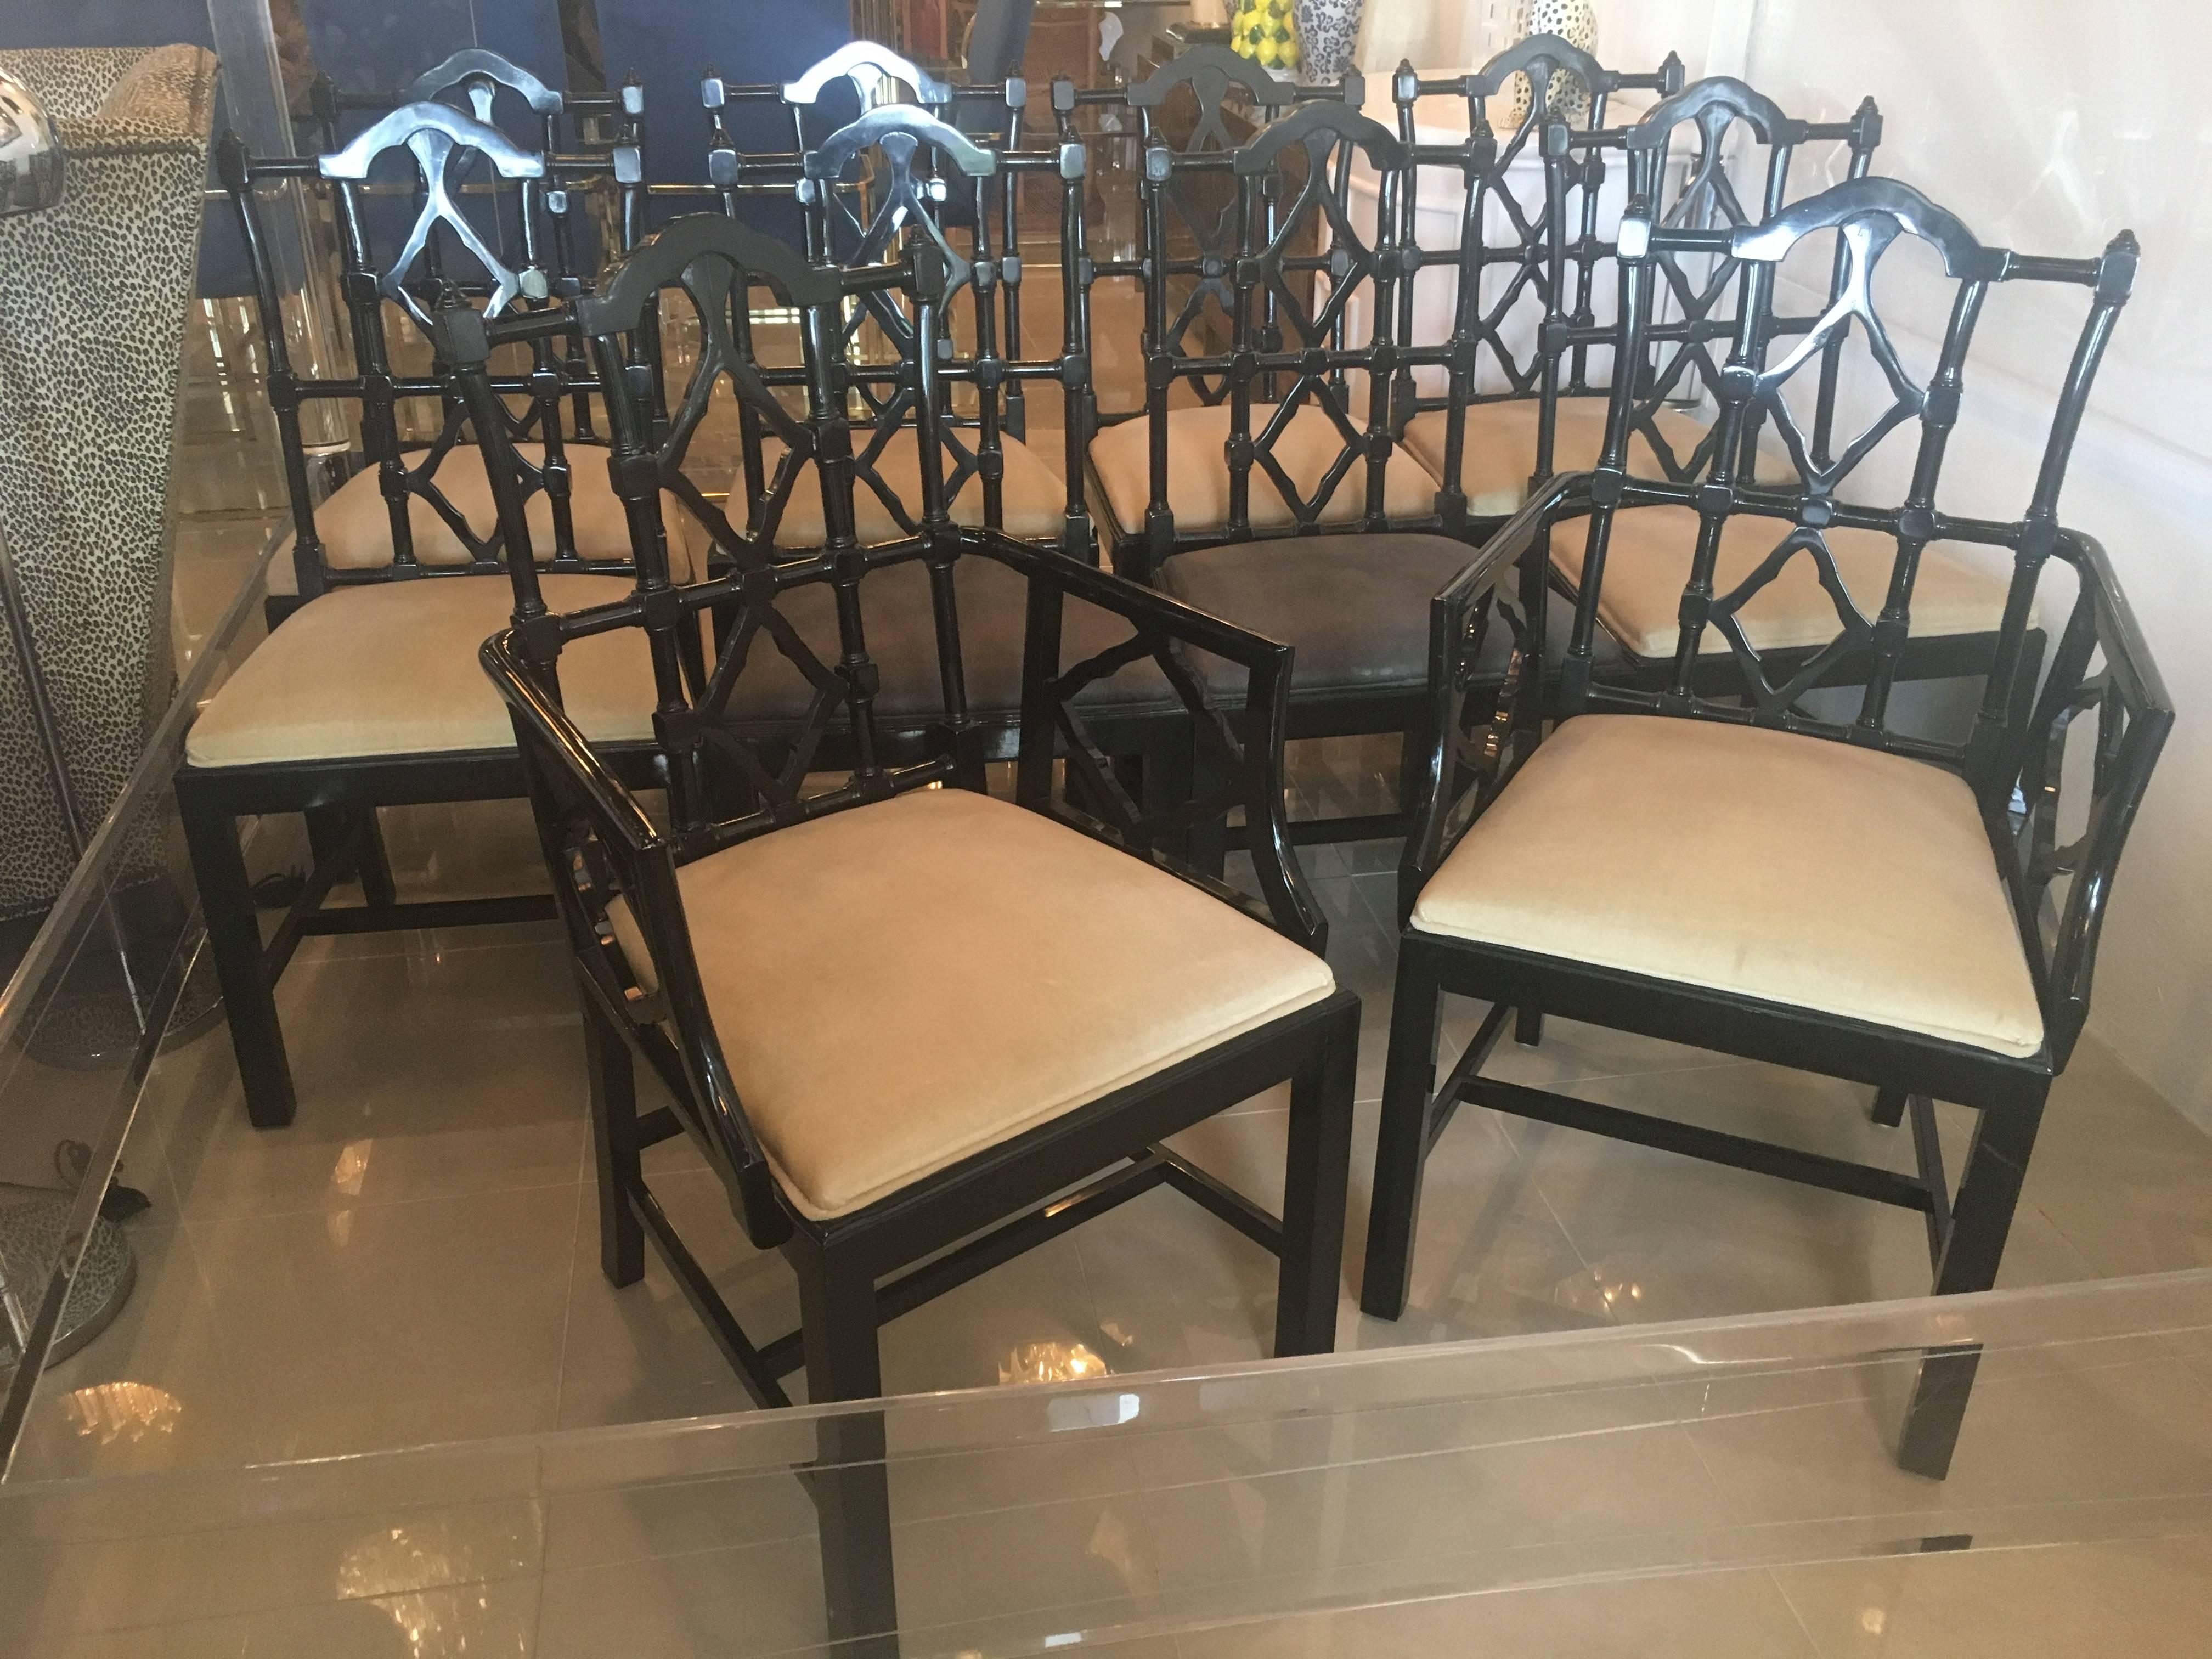 Wonderful set of ten Chinese Chippendale chinoiserie fretwork dining chairs, two-arm chairs and eight side chairs. Marked made in Spain underneath. These are very sturdy chairs! Original black lacquer is in good condition with some scuffs and